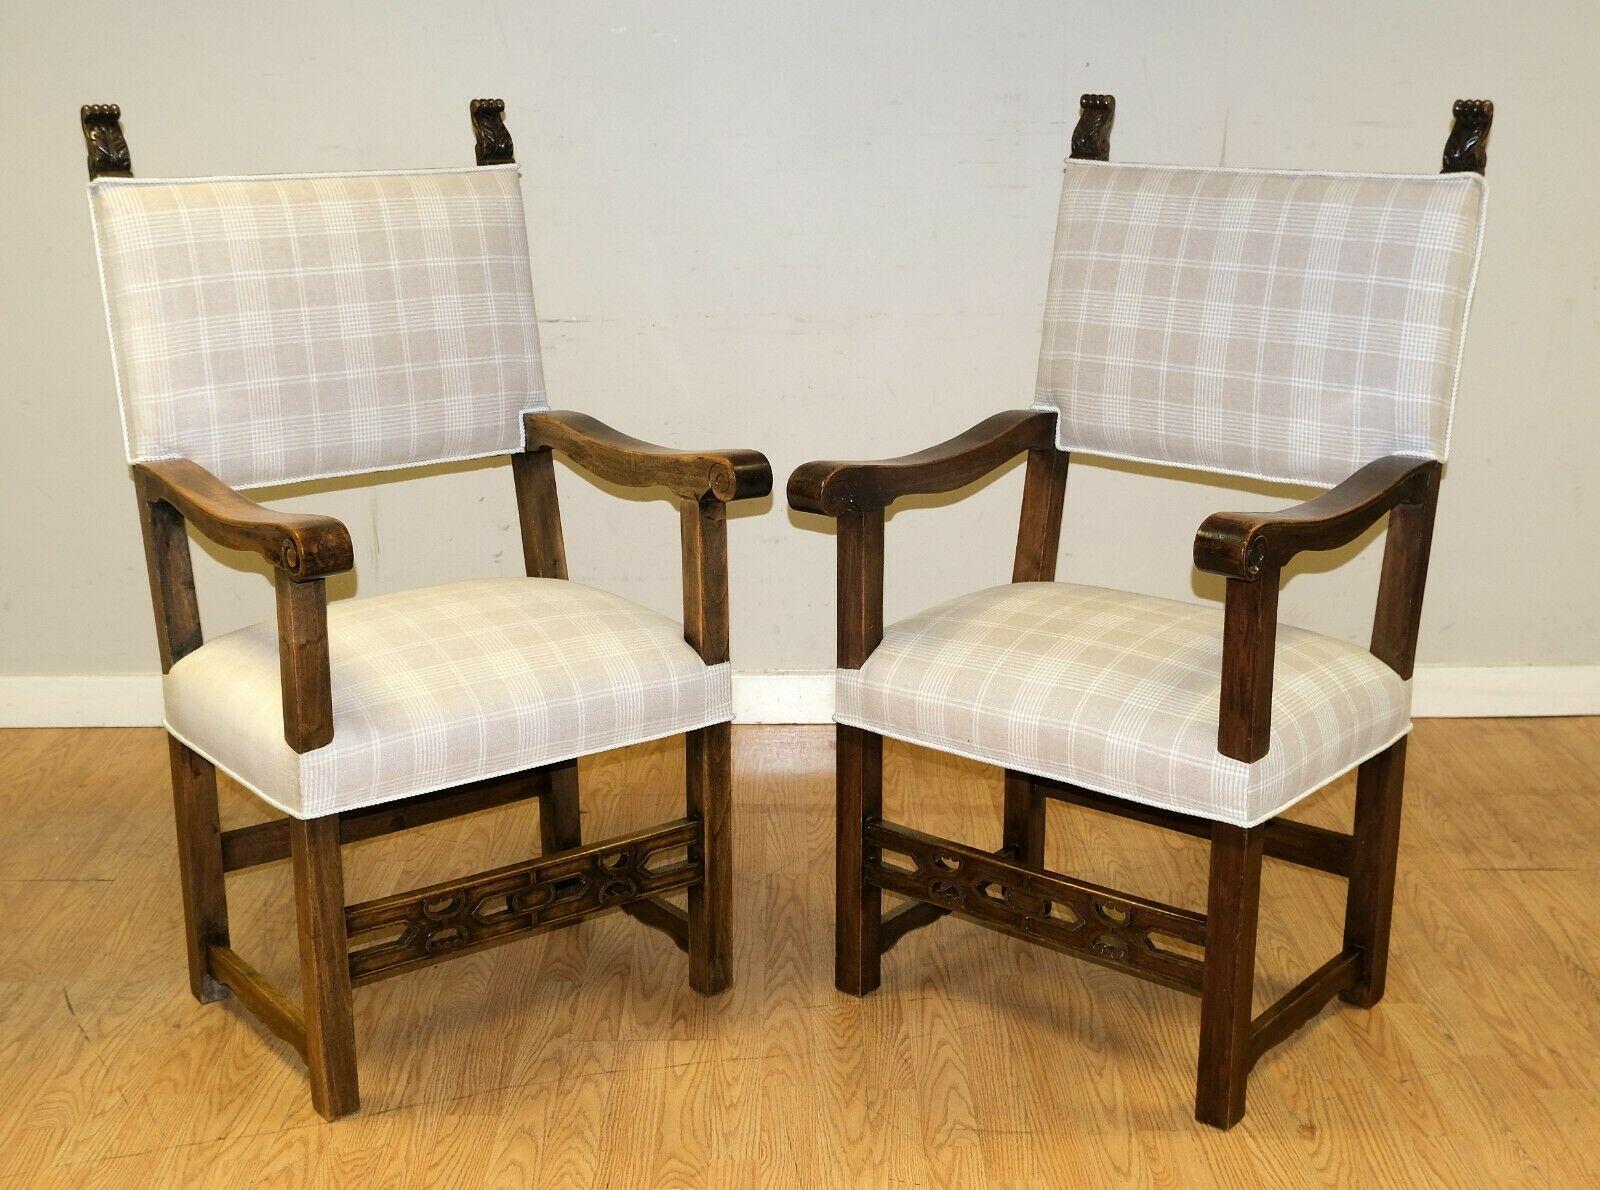 We are delighted to offer for sale this elegant pair of Mahogany throne armchairs with nice carvings.

The armchairs are very good looking with a nice coloured seat area and high back. The pair are solid, well made and comfortable. The carvings is